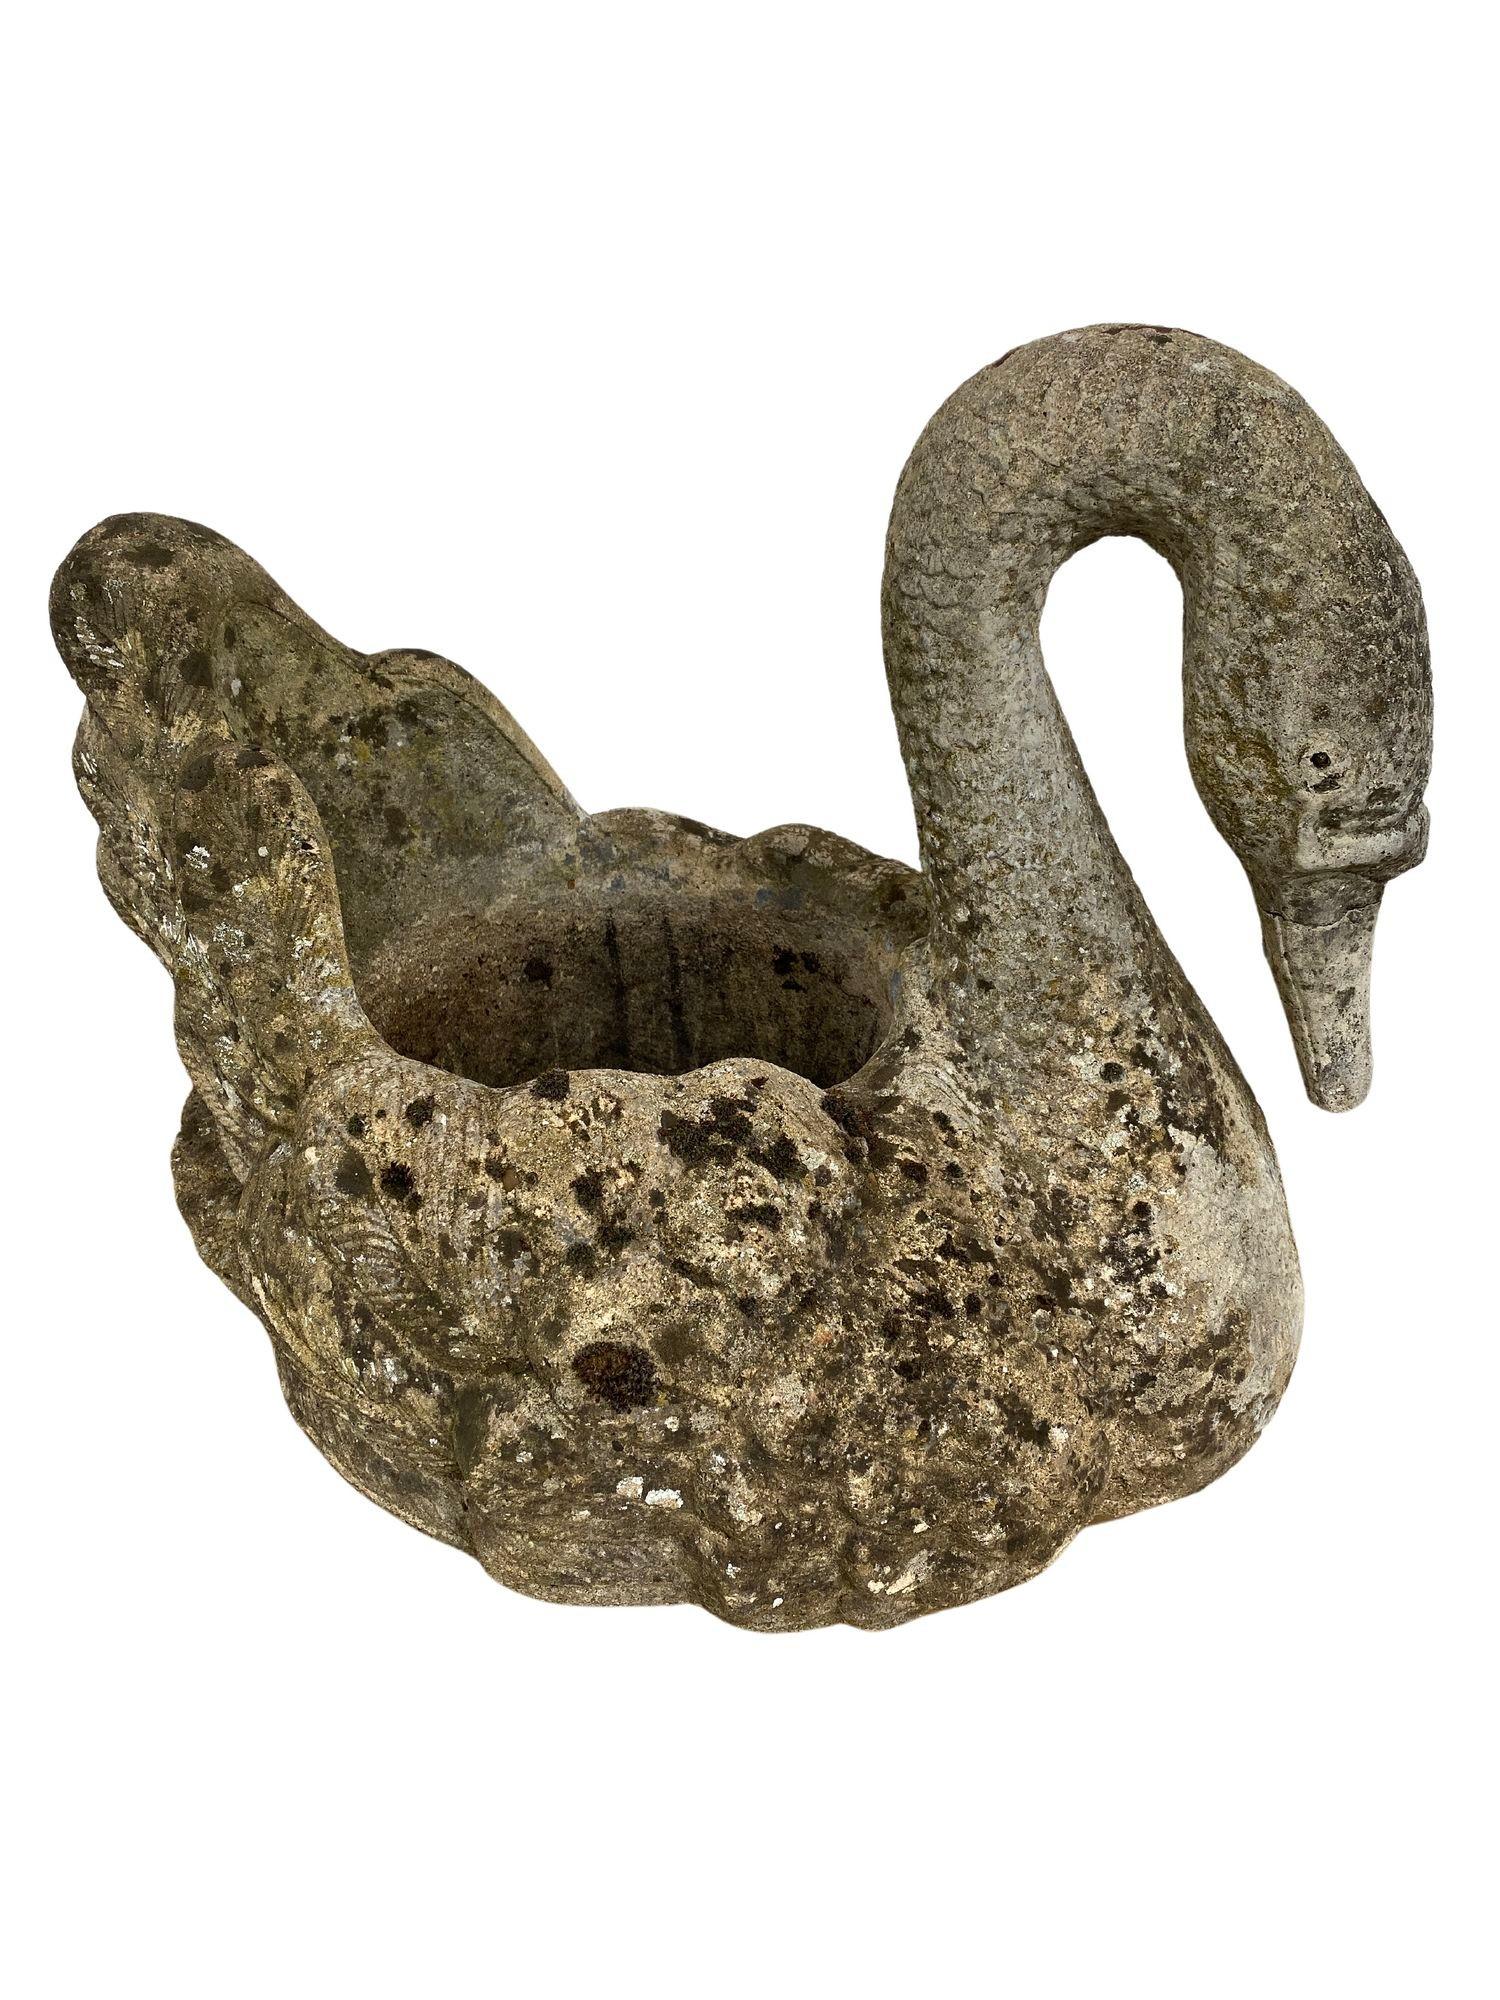 Reconstituted Stone Swan Planter, French Mid-20th Century 5